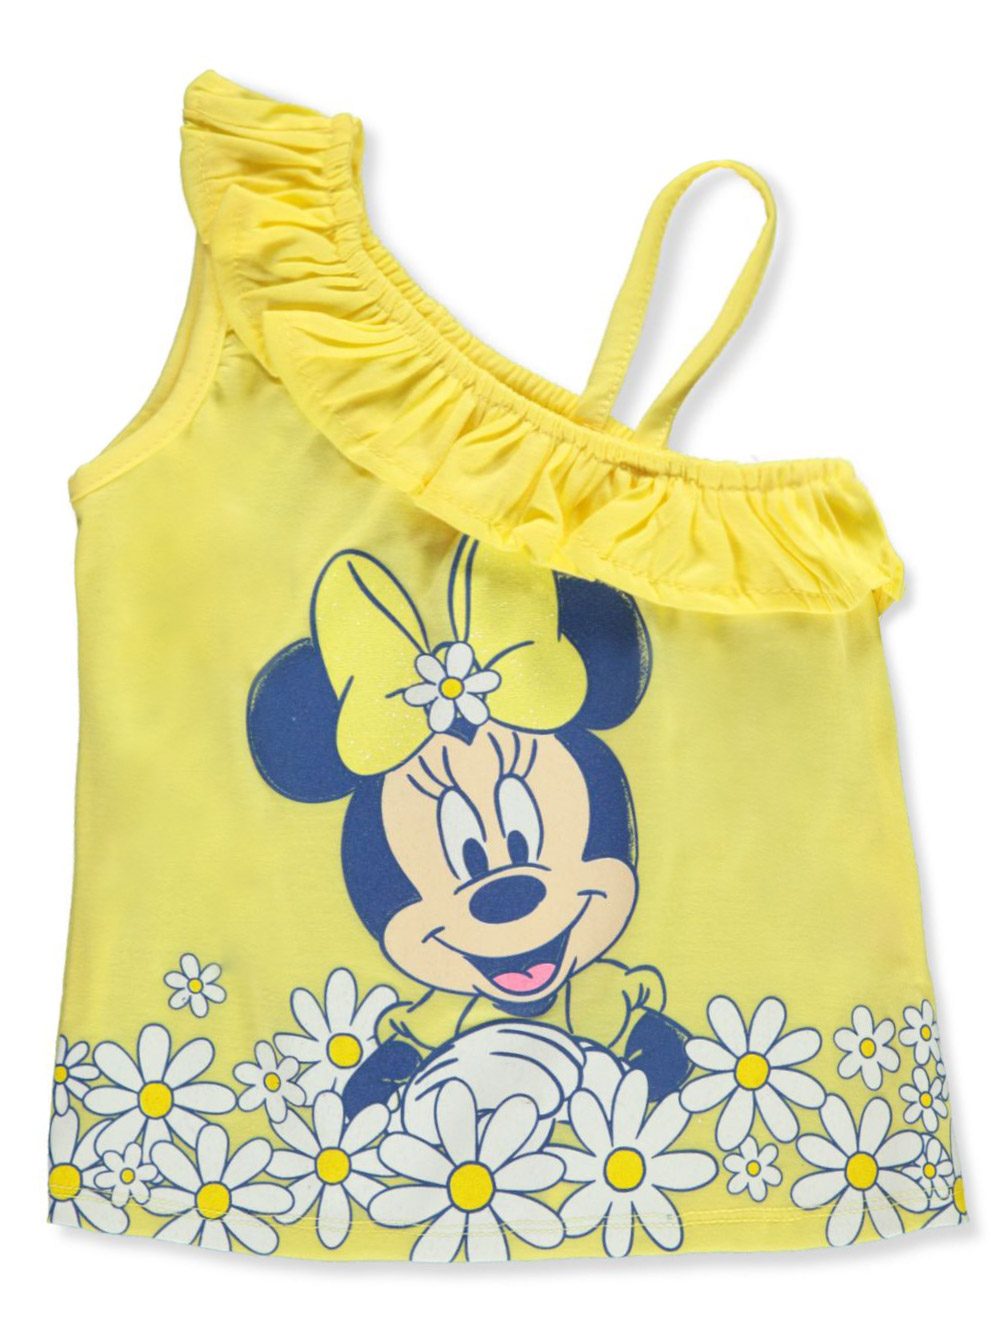 Disney Minnie Mouse Girls' 2-Piece Daisy Shorts Set Outfit - yellow/multi, 3t (Toddler) - image 3 of 3